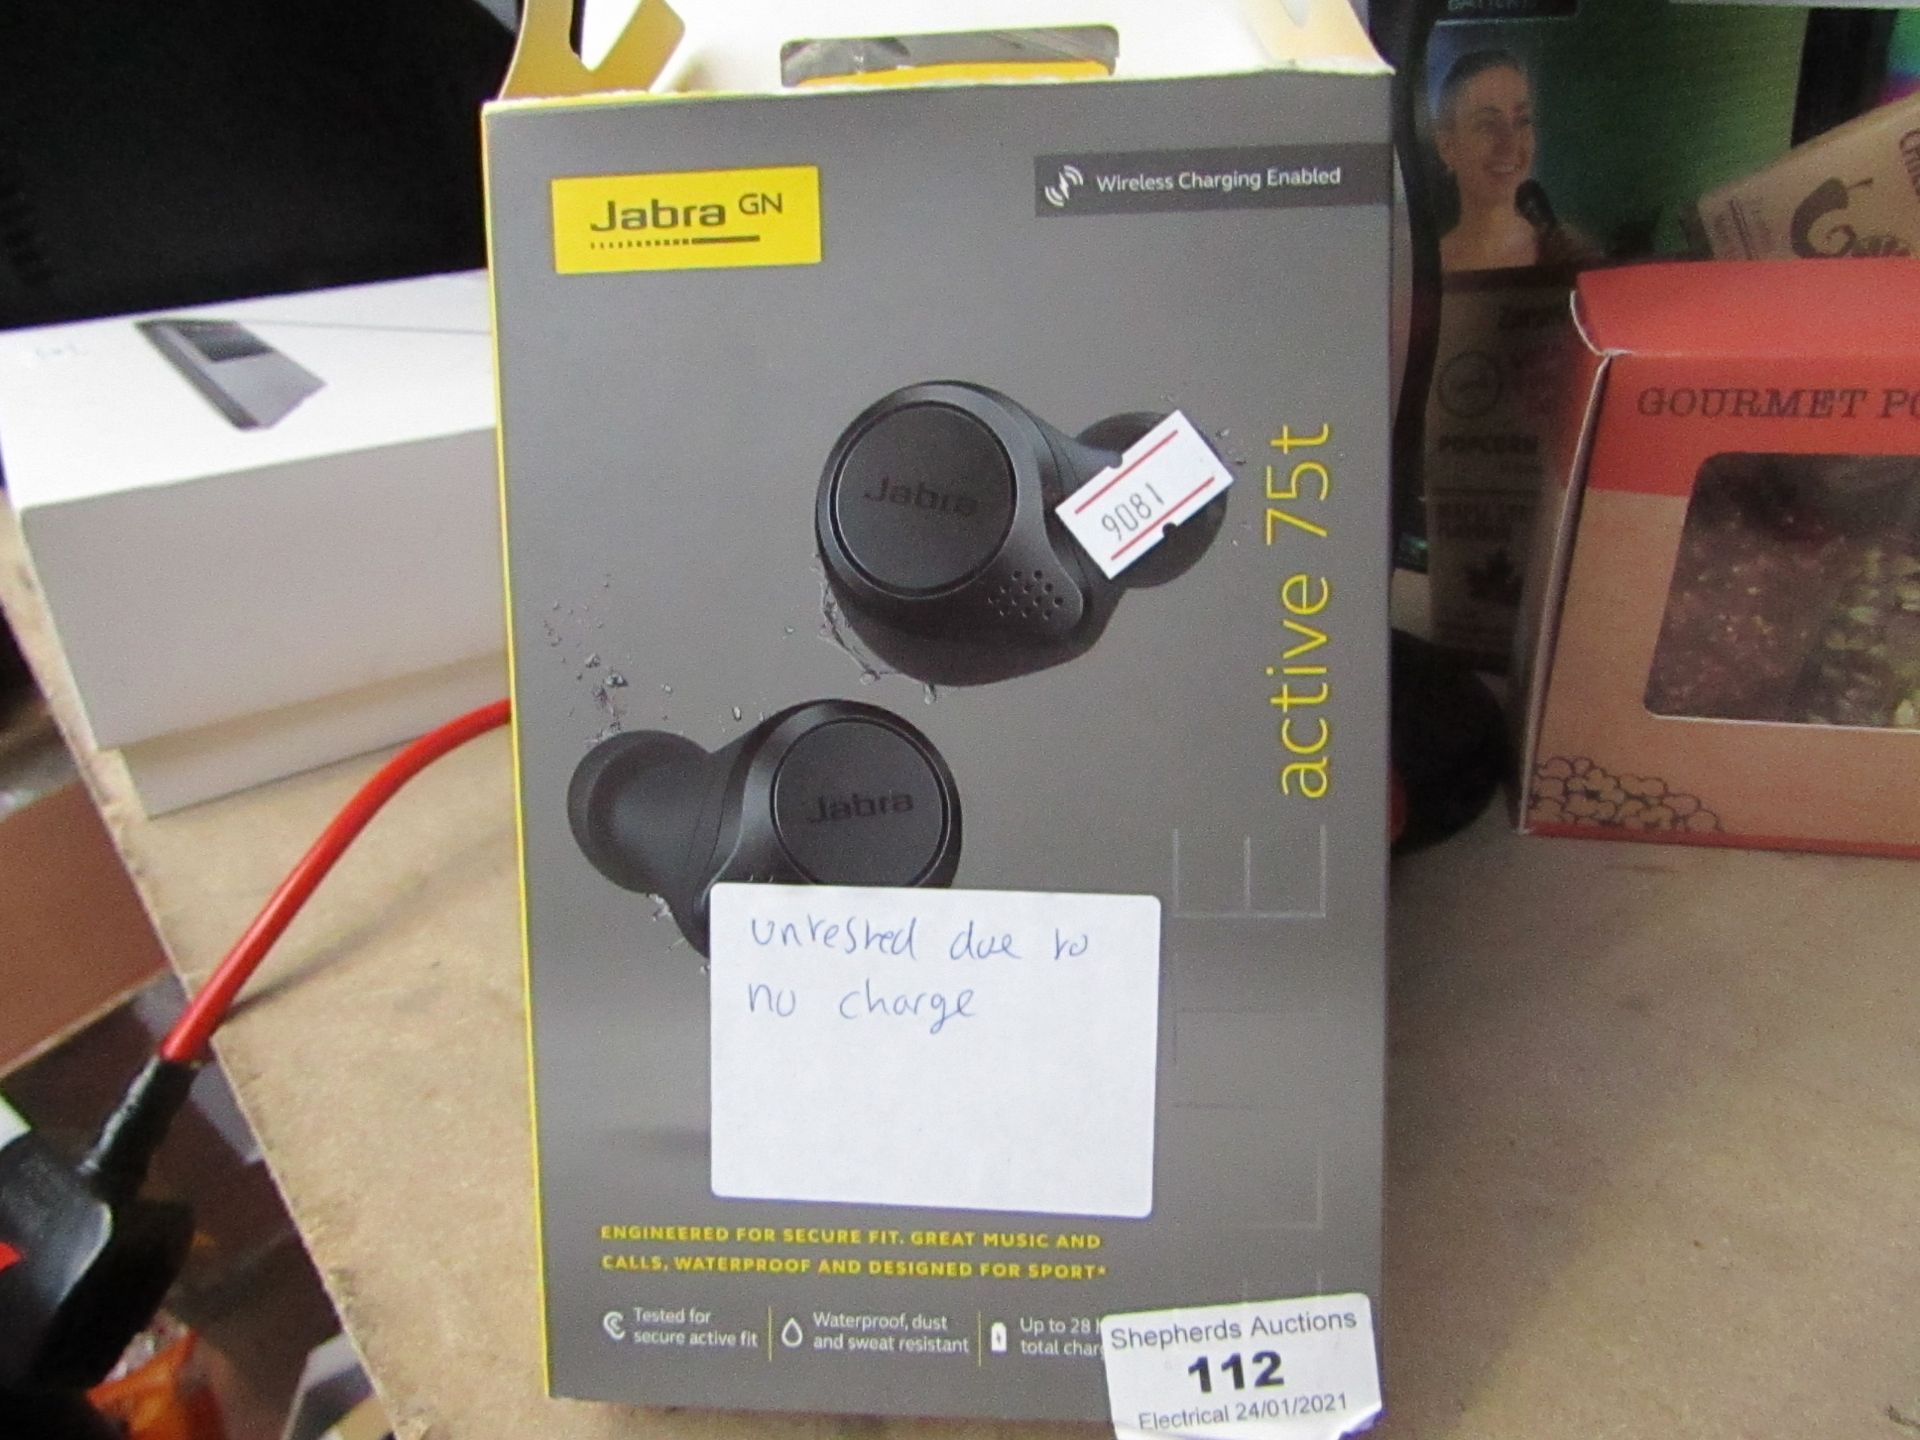 Jabra wireless earbuds, untested due to no charger.